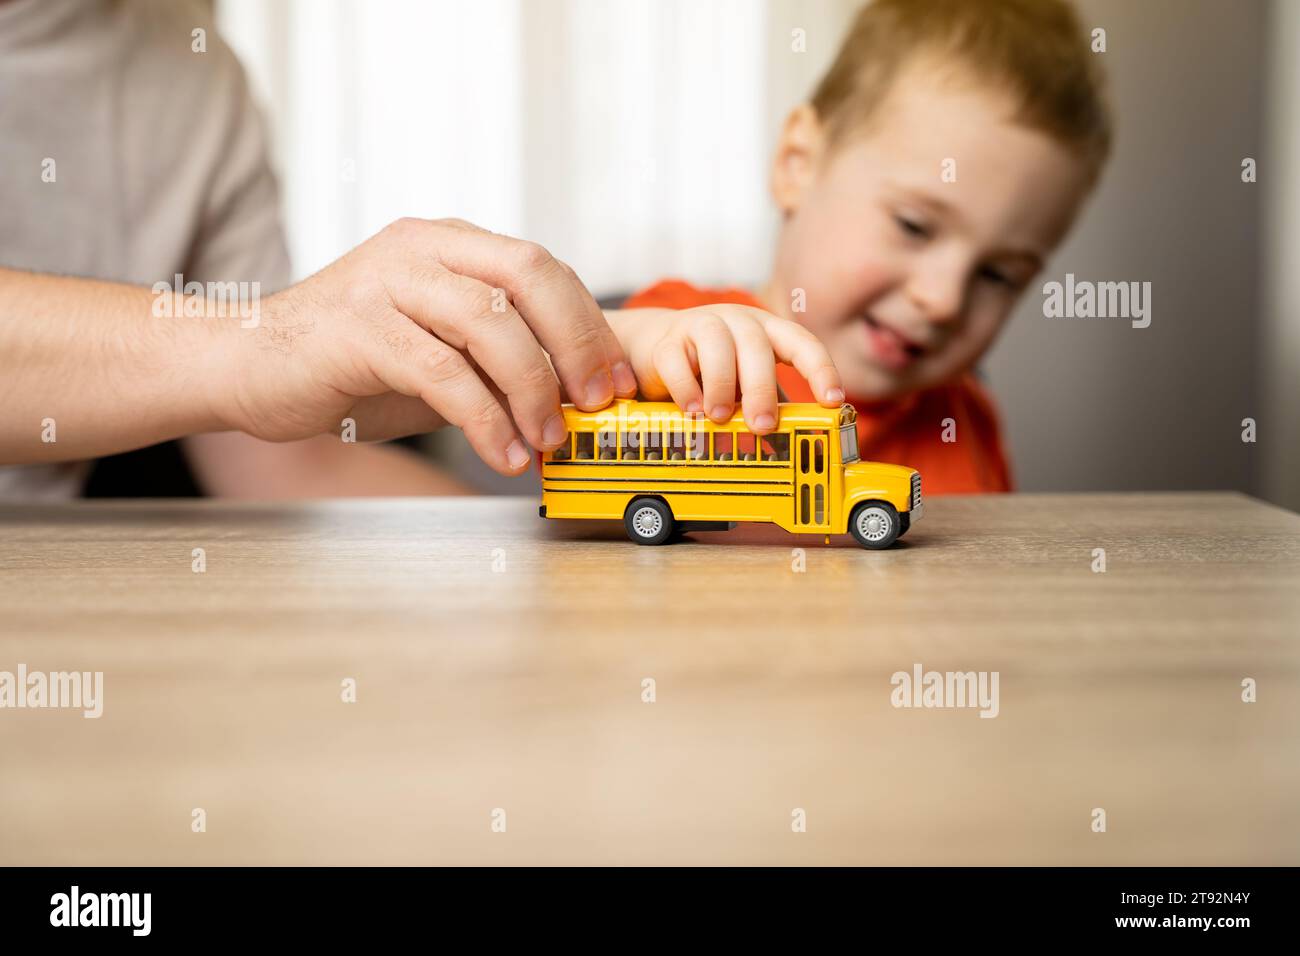 Happy smiling toddler boy playing with yellow car with his dad. Spending time with children. The concept of a happy childhood. Focus on the toy car. Stock Photo